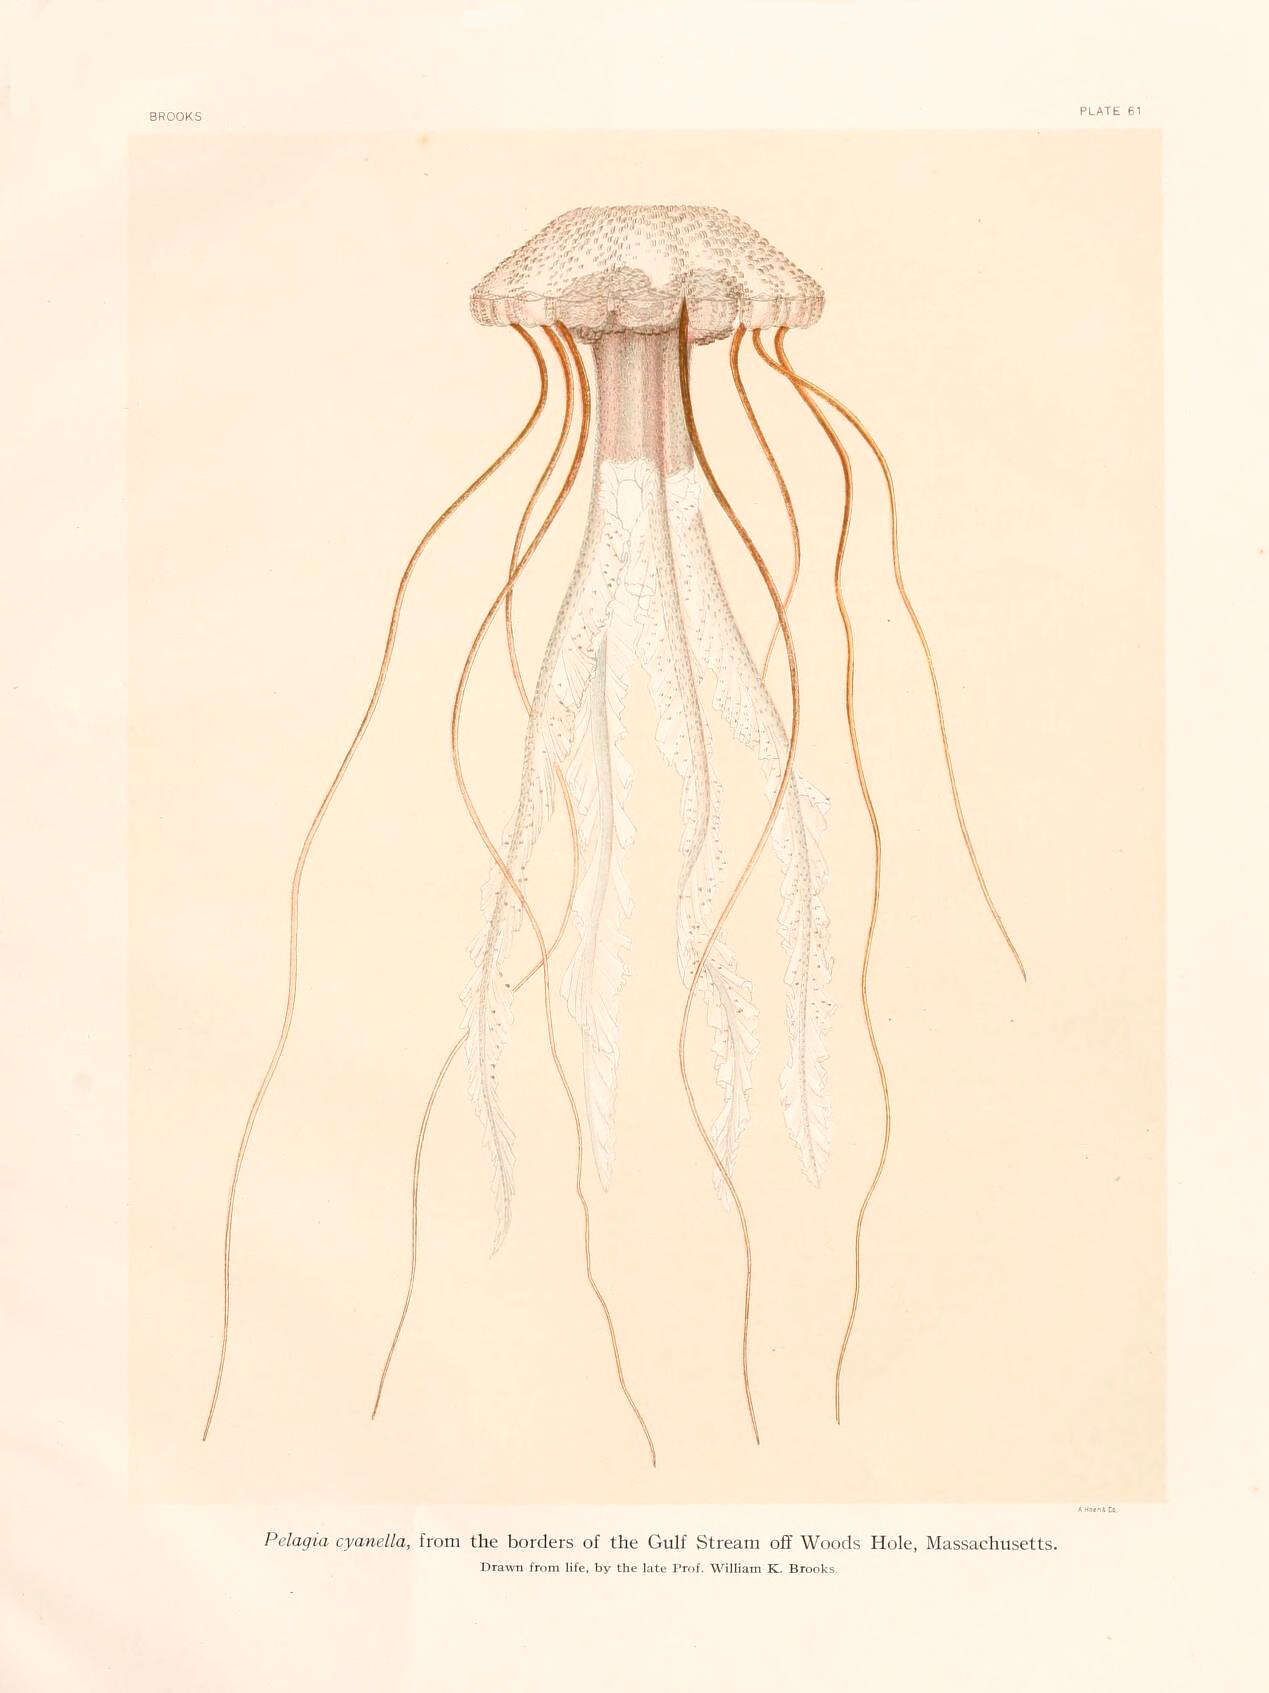 Image of Purplestriped jellyfishes